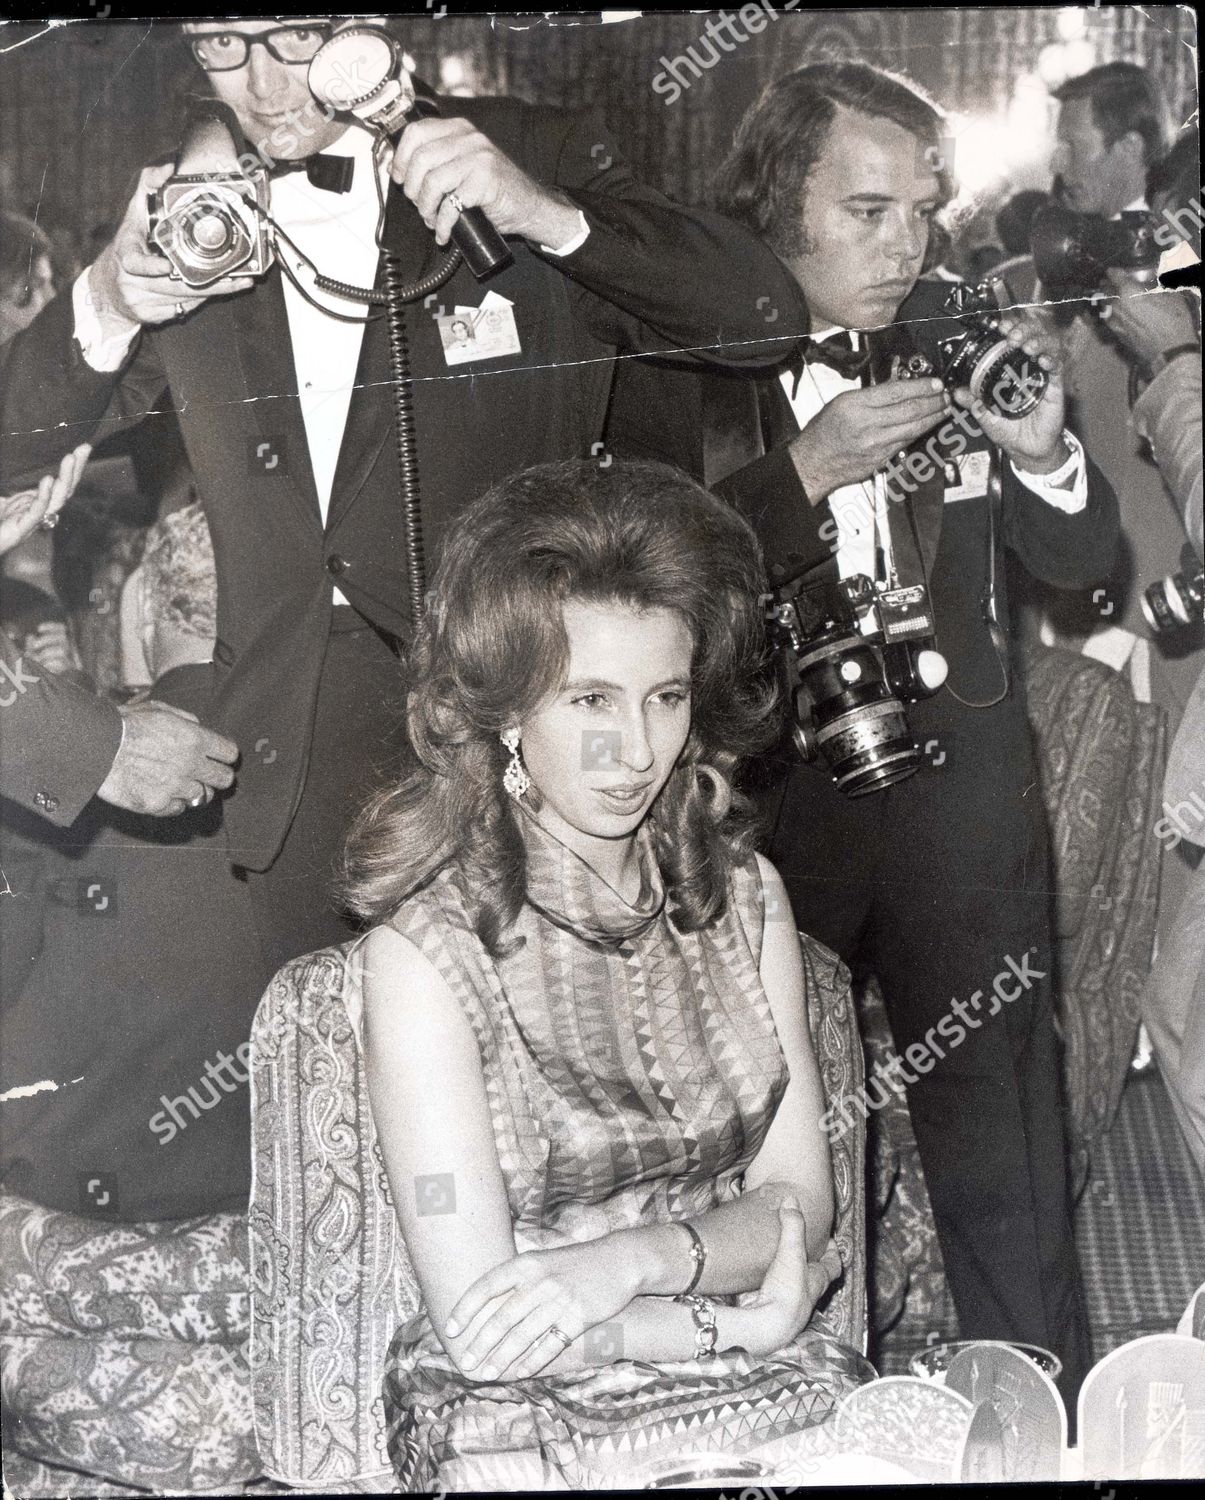 princess-anne-now-princess-royal-october-1971-princess-anne-and-photographers-in-the-tented-village-of-persepolis-250th-anniversary-of-the-persian-empire-shutterstock-editorial-896319a.jpg